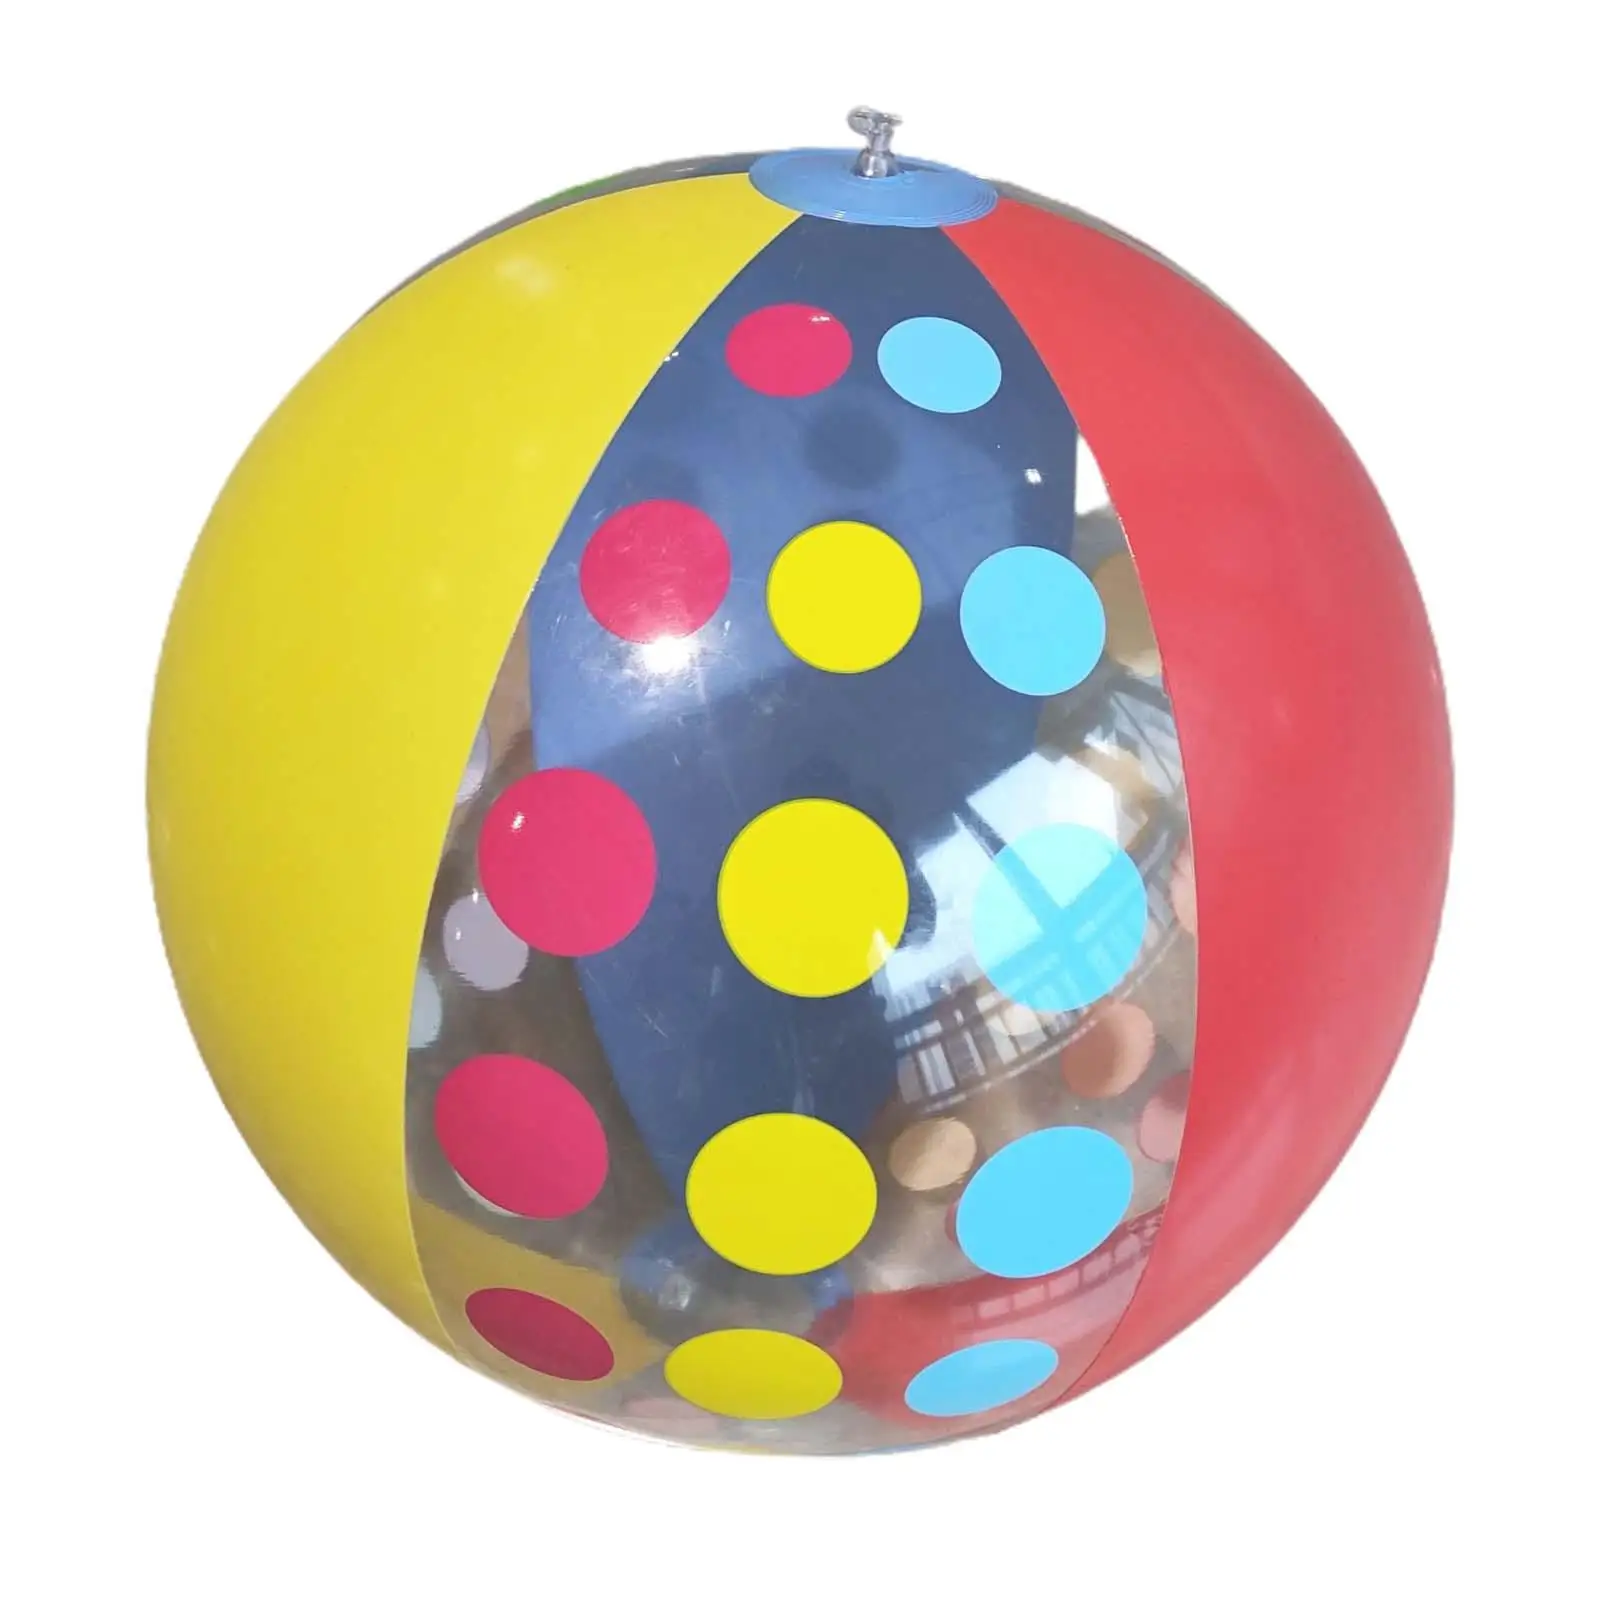 Summer Beach Ball Pool Game Multipurpose Blow Balls Inflatable Pool Toys for Pool Beach Holiday Hawaiian Theme Party Summer